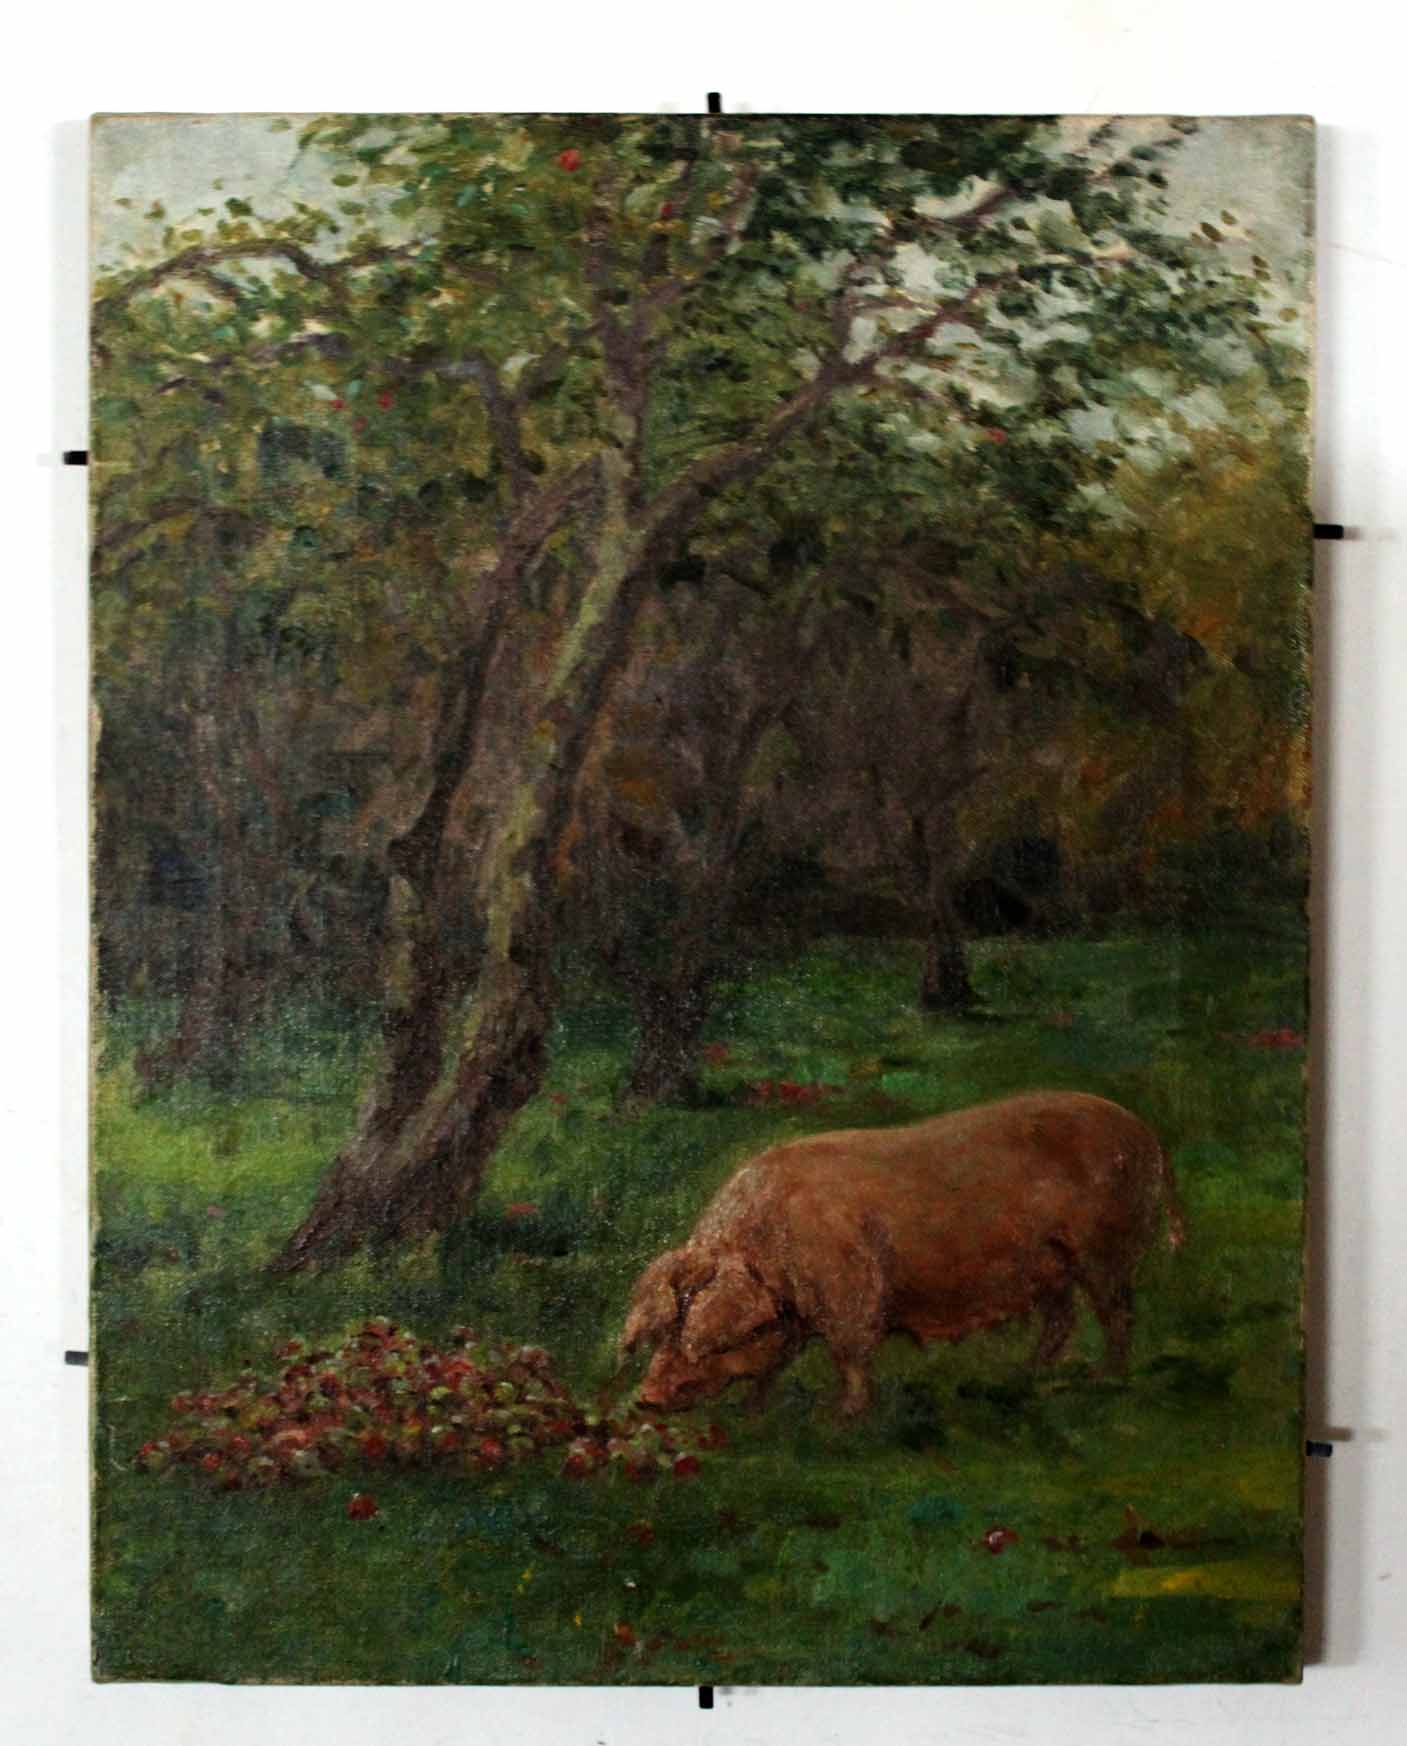 Attributed to William Banks Fortescue, Pig in an Orchard, oil on canvas, 46 x 35cms